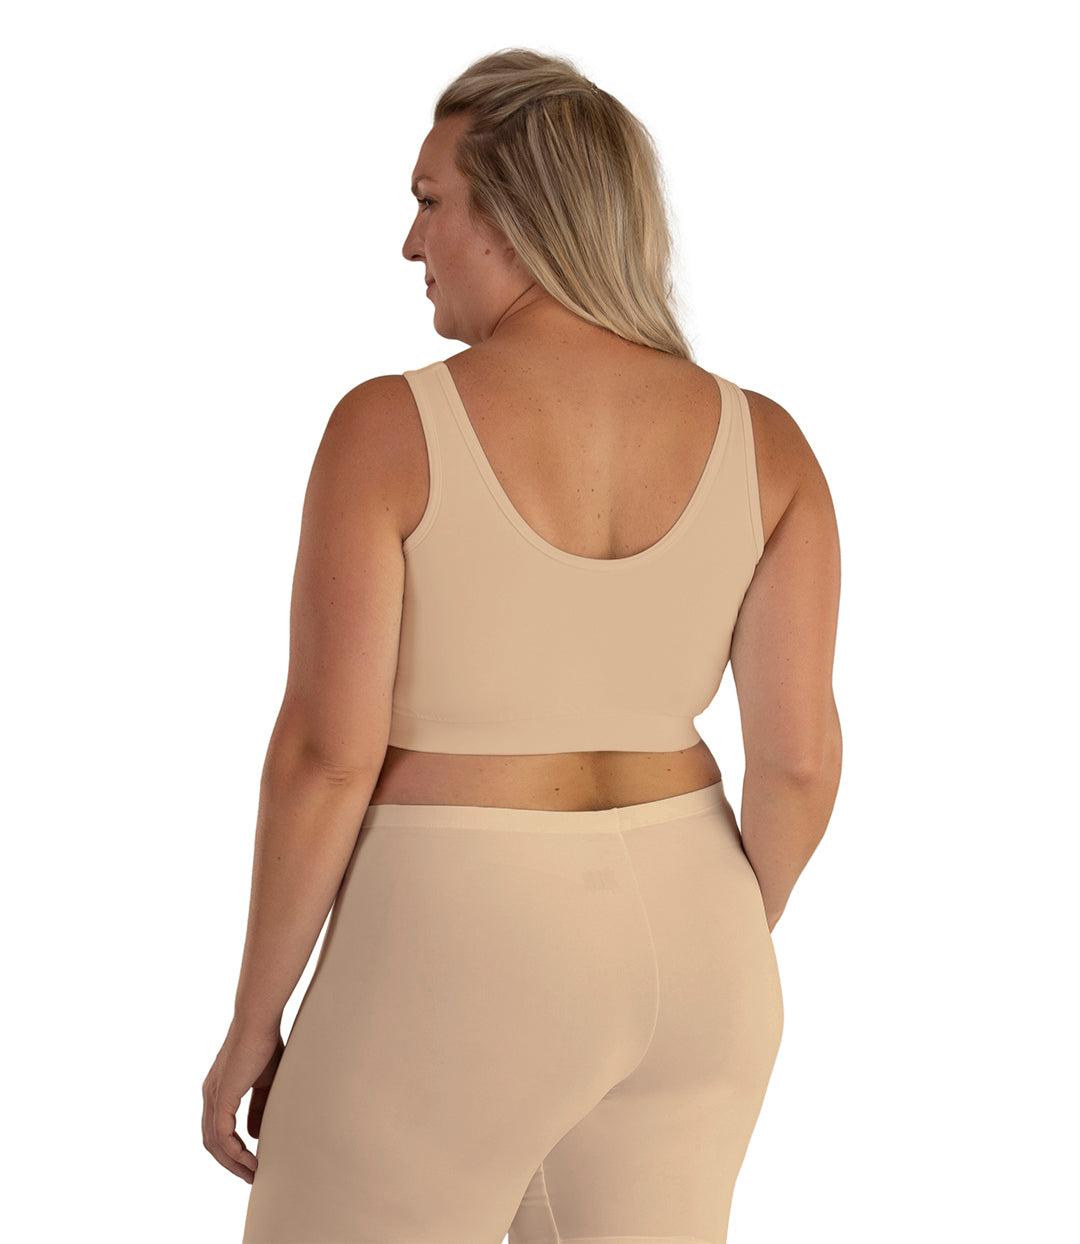 Plus size woman, facing back, wearing JunoActive plus size Junowear Hush V-Neck Bra in Ecru. The woman is wearing ecru Junowear Hush Boxer brief. Her arms fall naturally to her side.